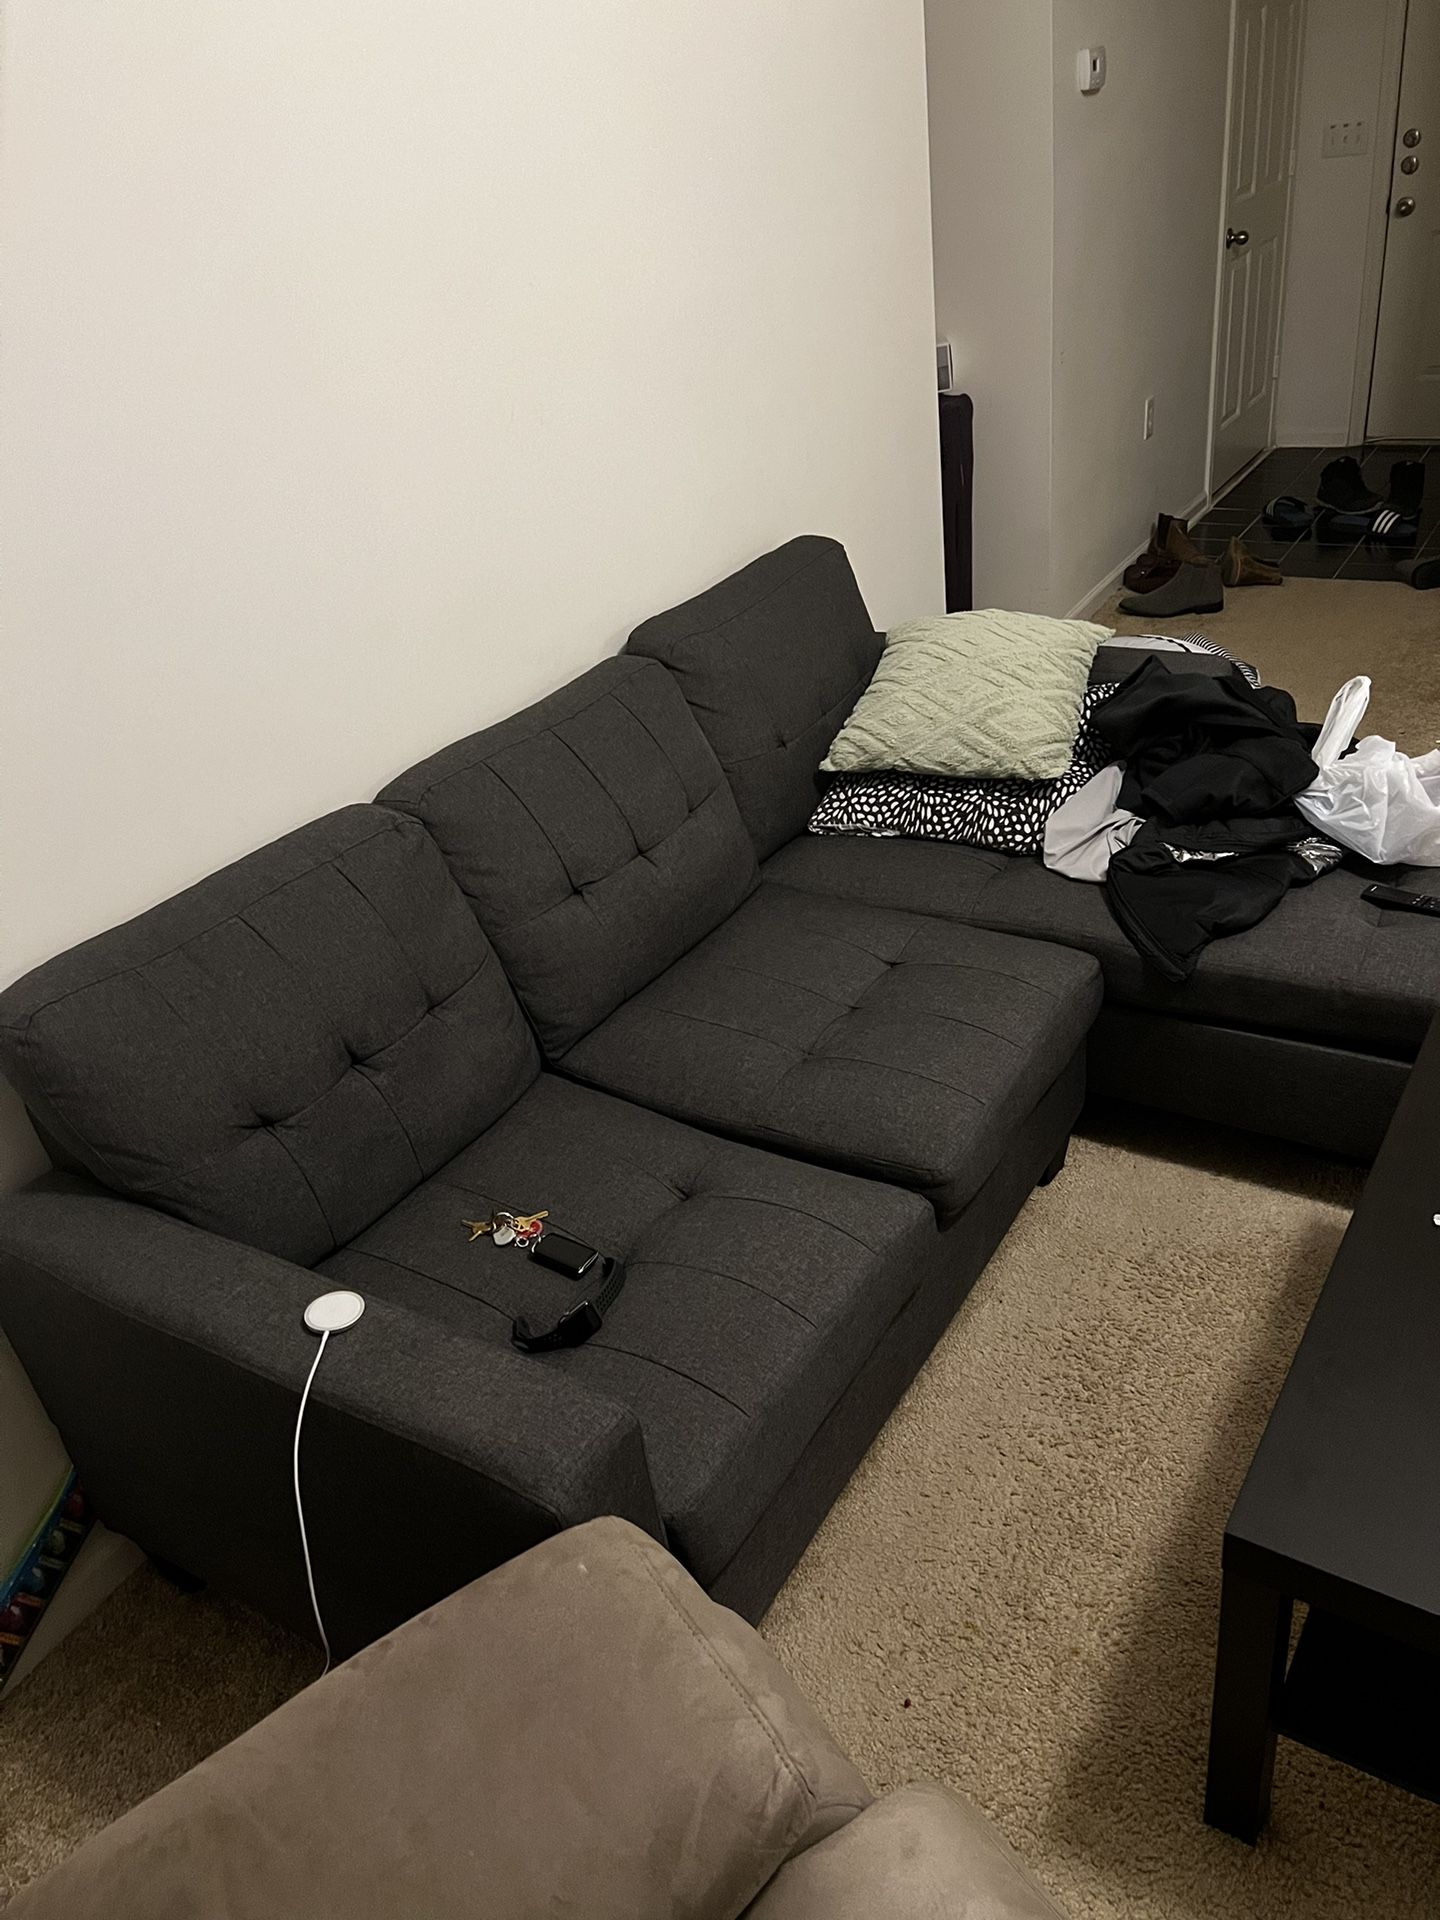 Couch, Recliner And Office Chair 